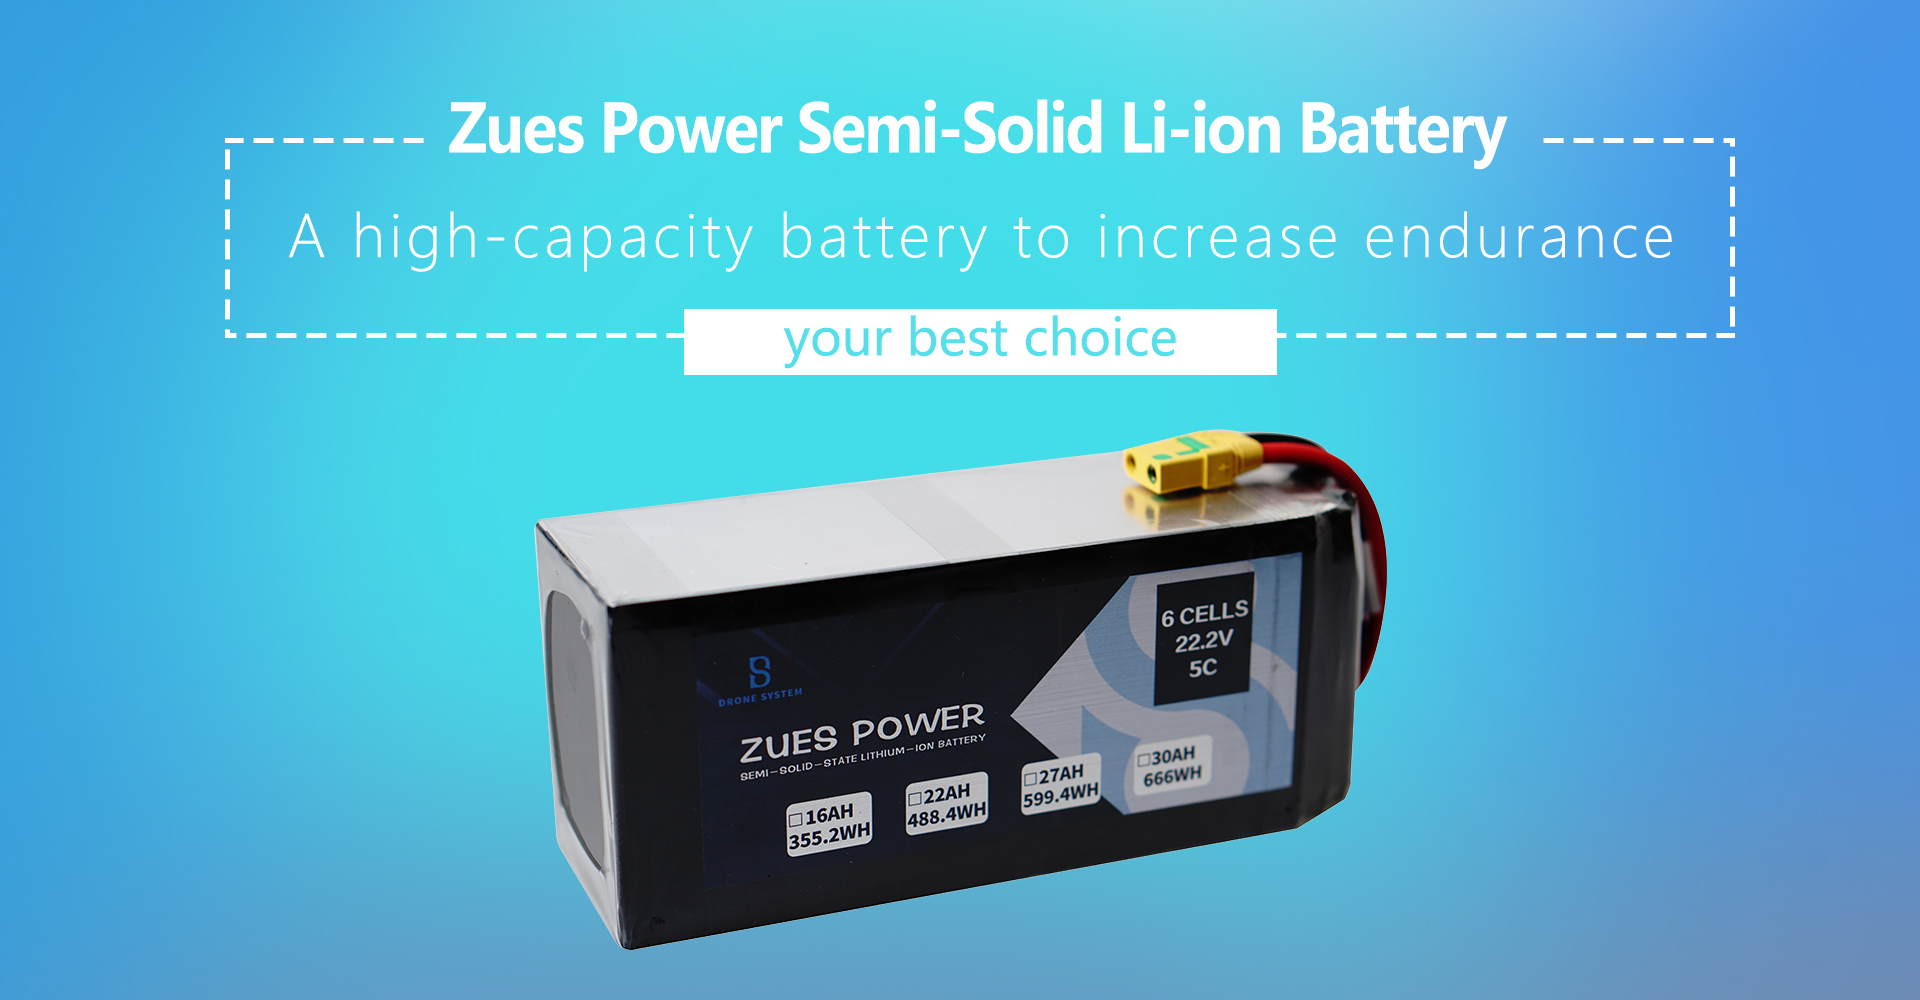 Zues Power Semi-Solid Li-ion Battery 5C 6S  